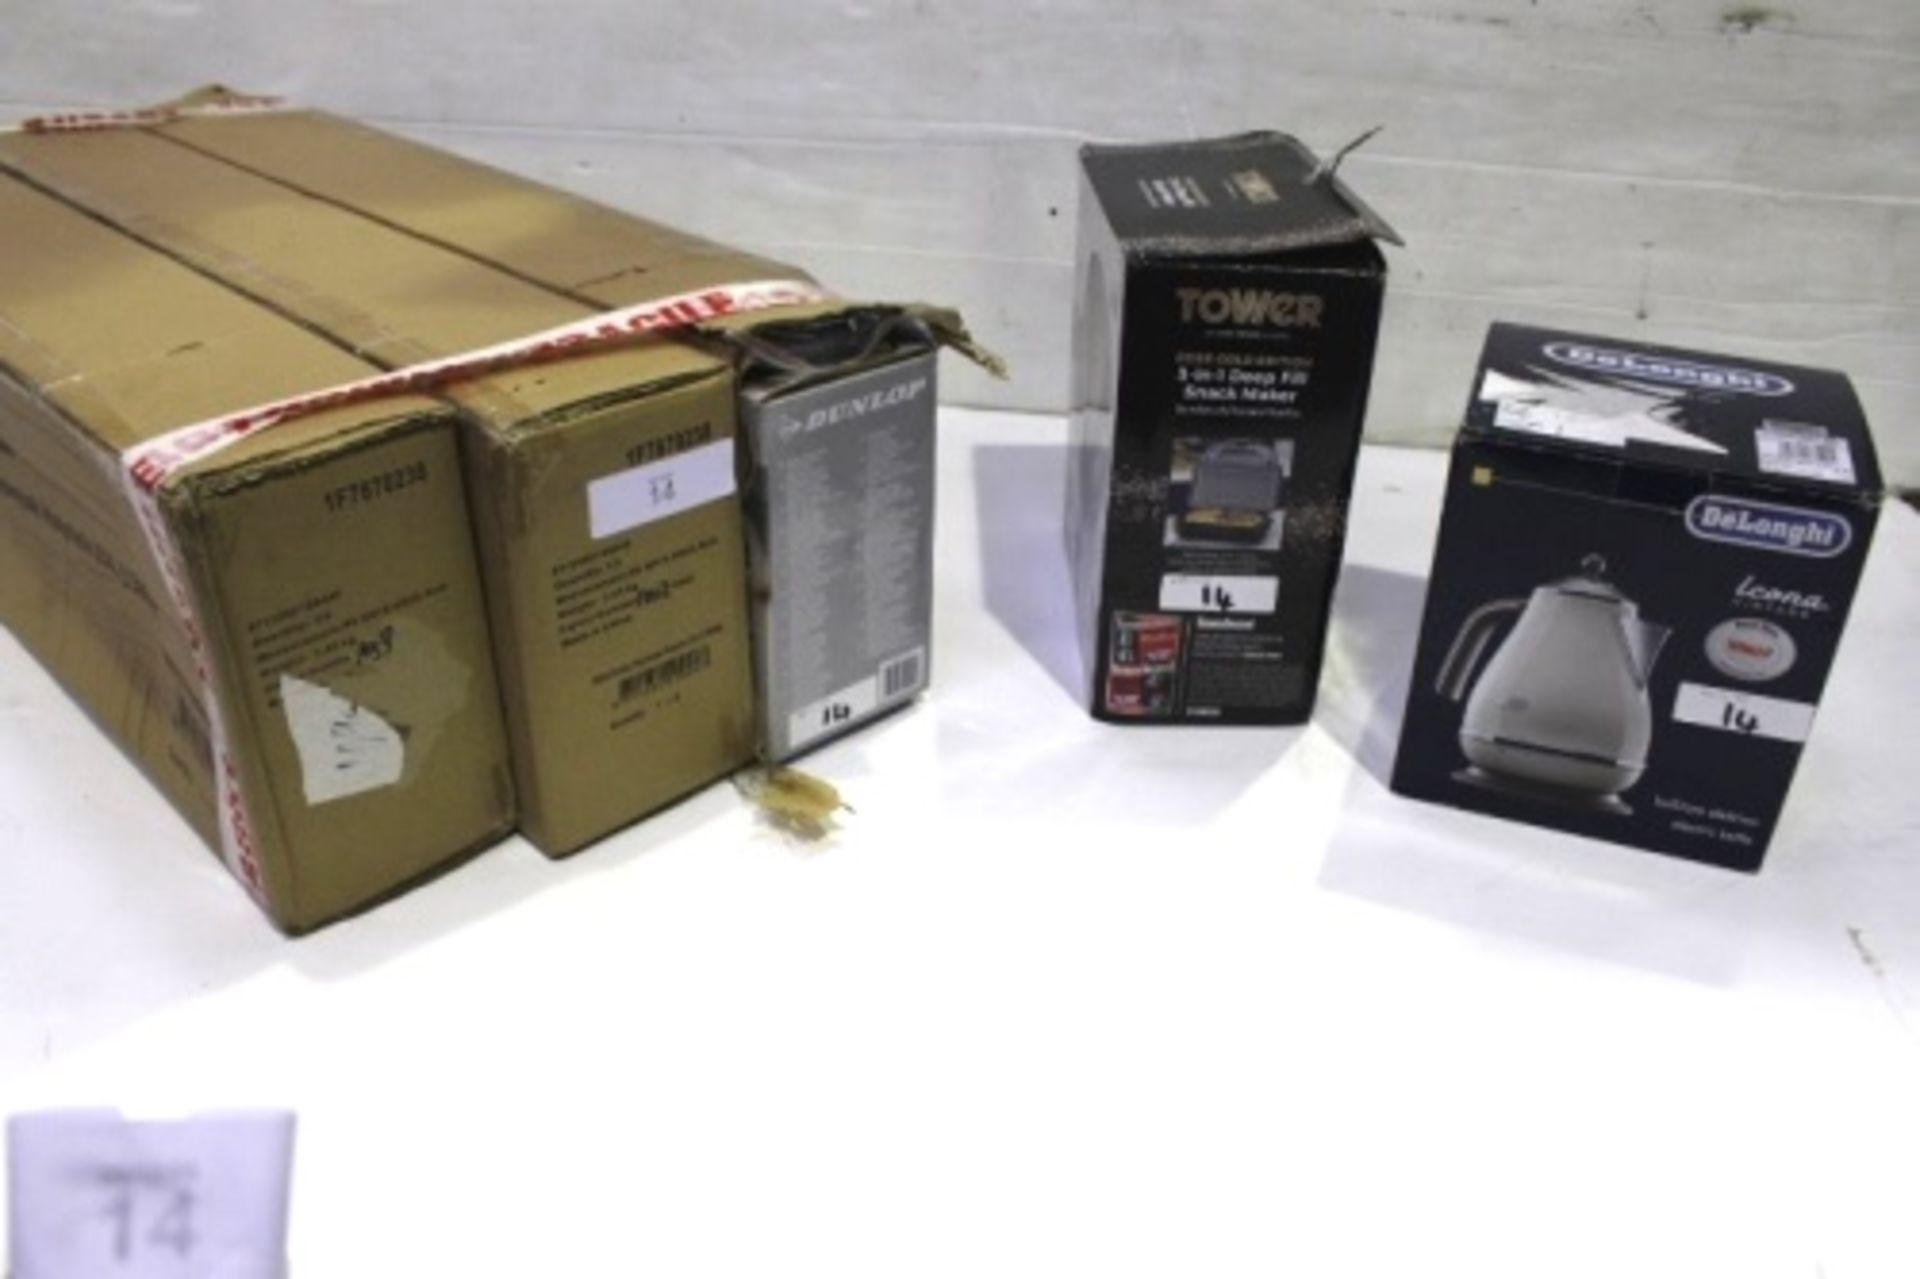 3 x Dunlop Teppanyaki electric grills, model 12044, together with Delonghi Icona kettle, model